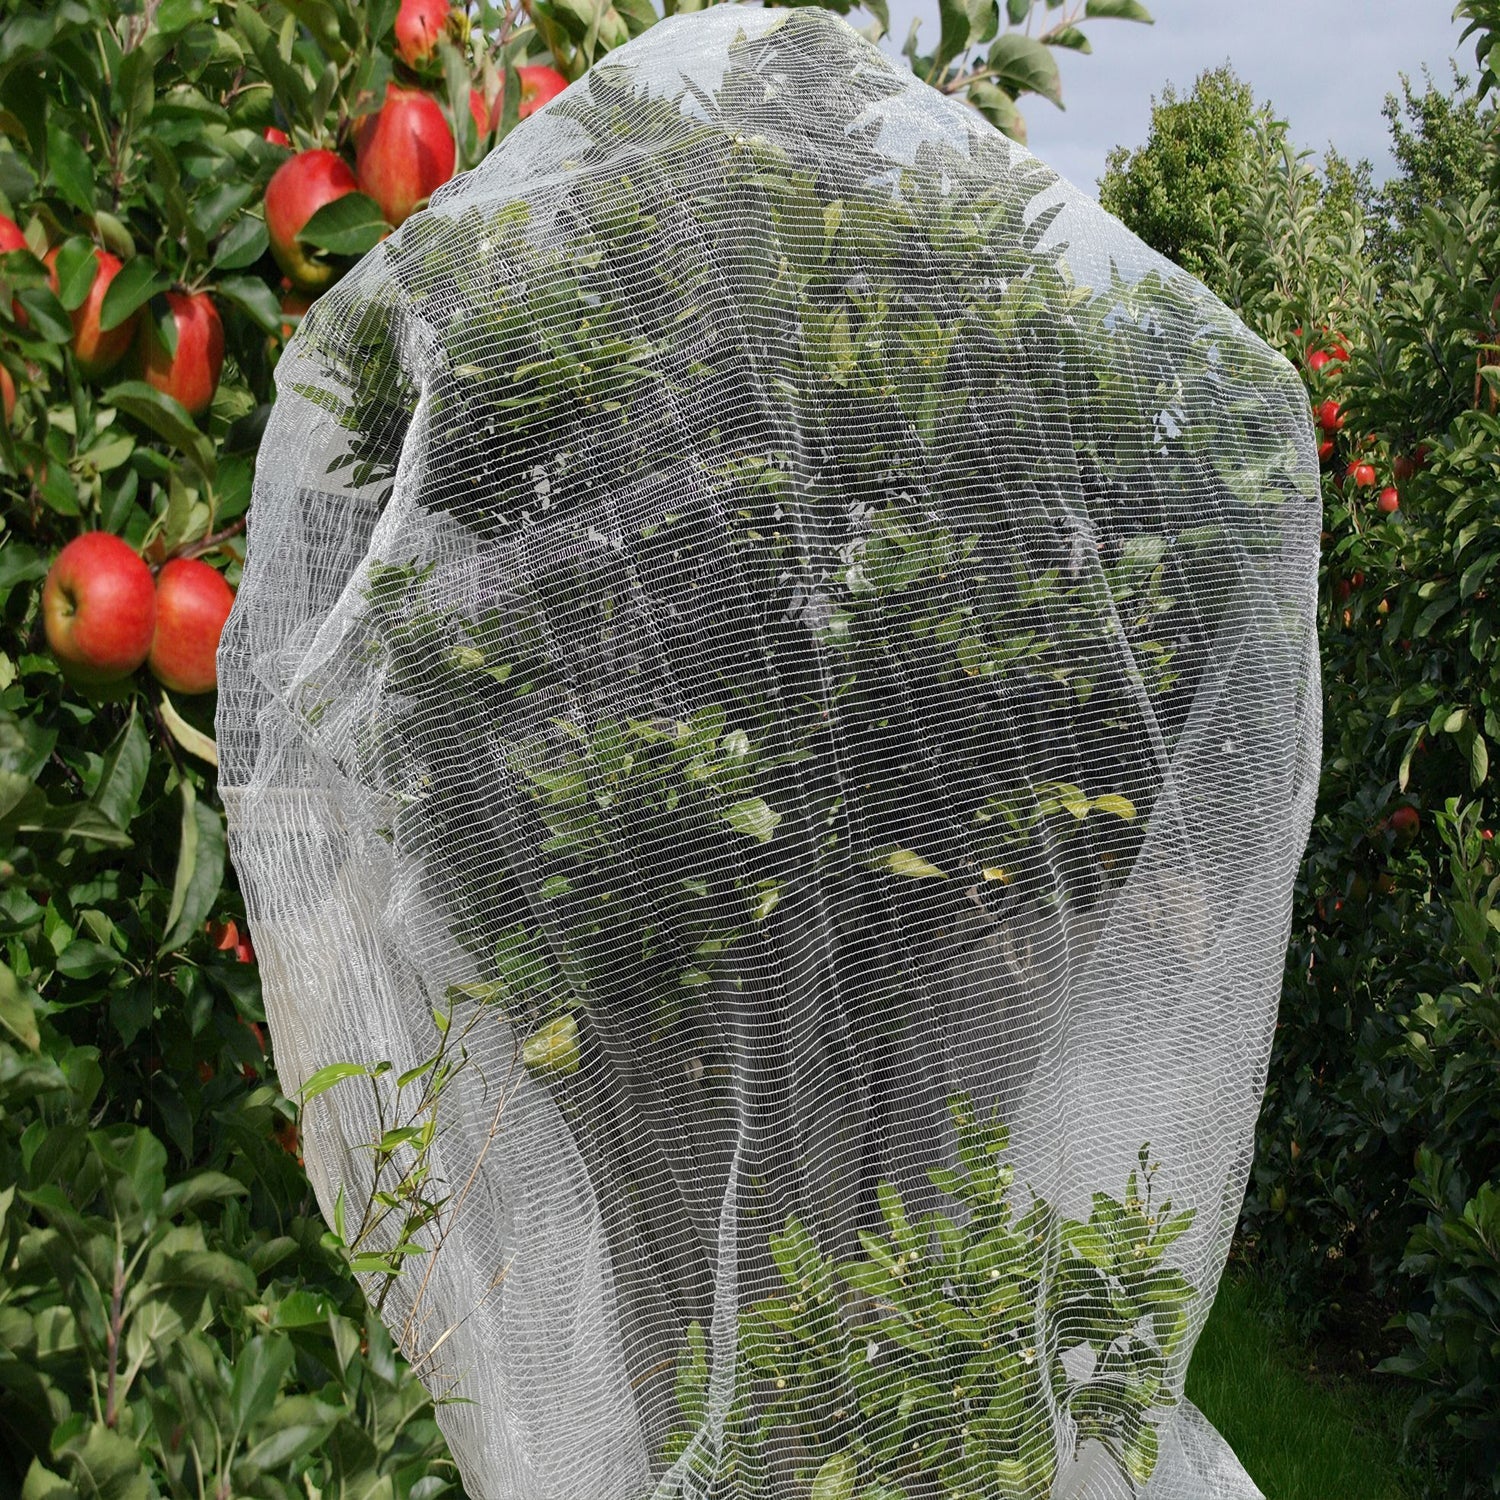 QOZY Fruit Fly Net Insect Mesh Vegetable Garden Plant Crops Bird Protection